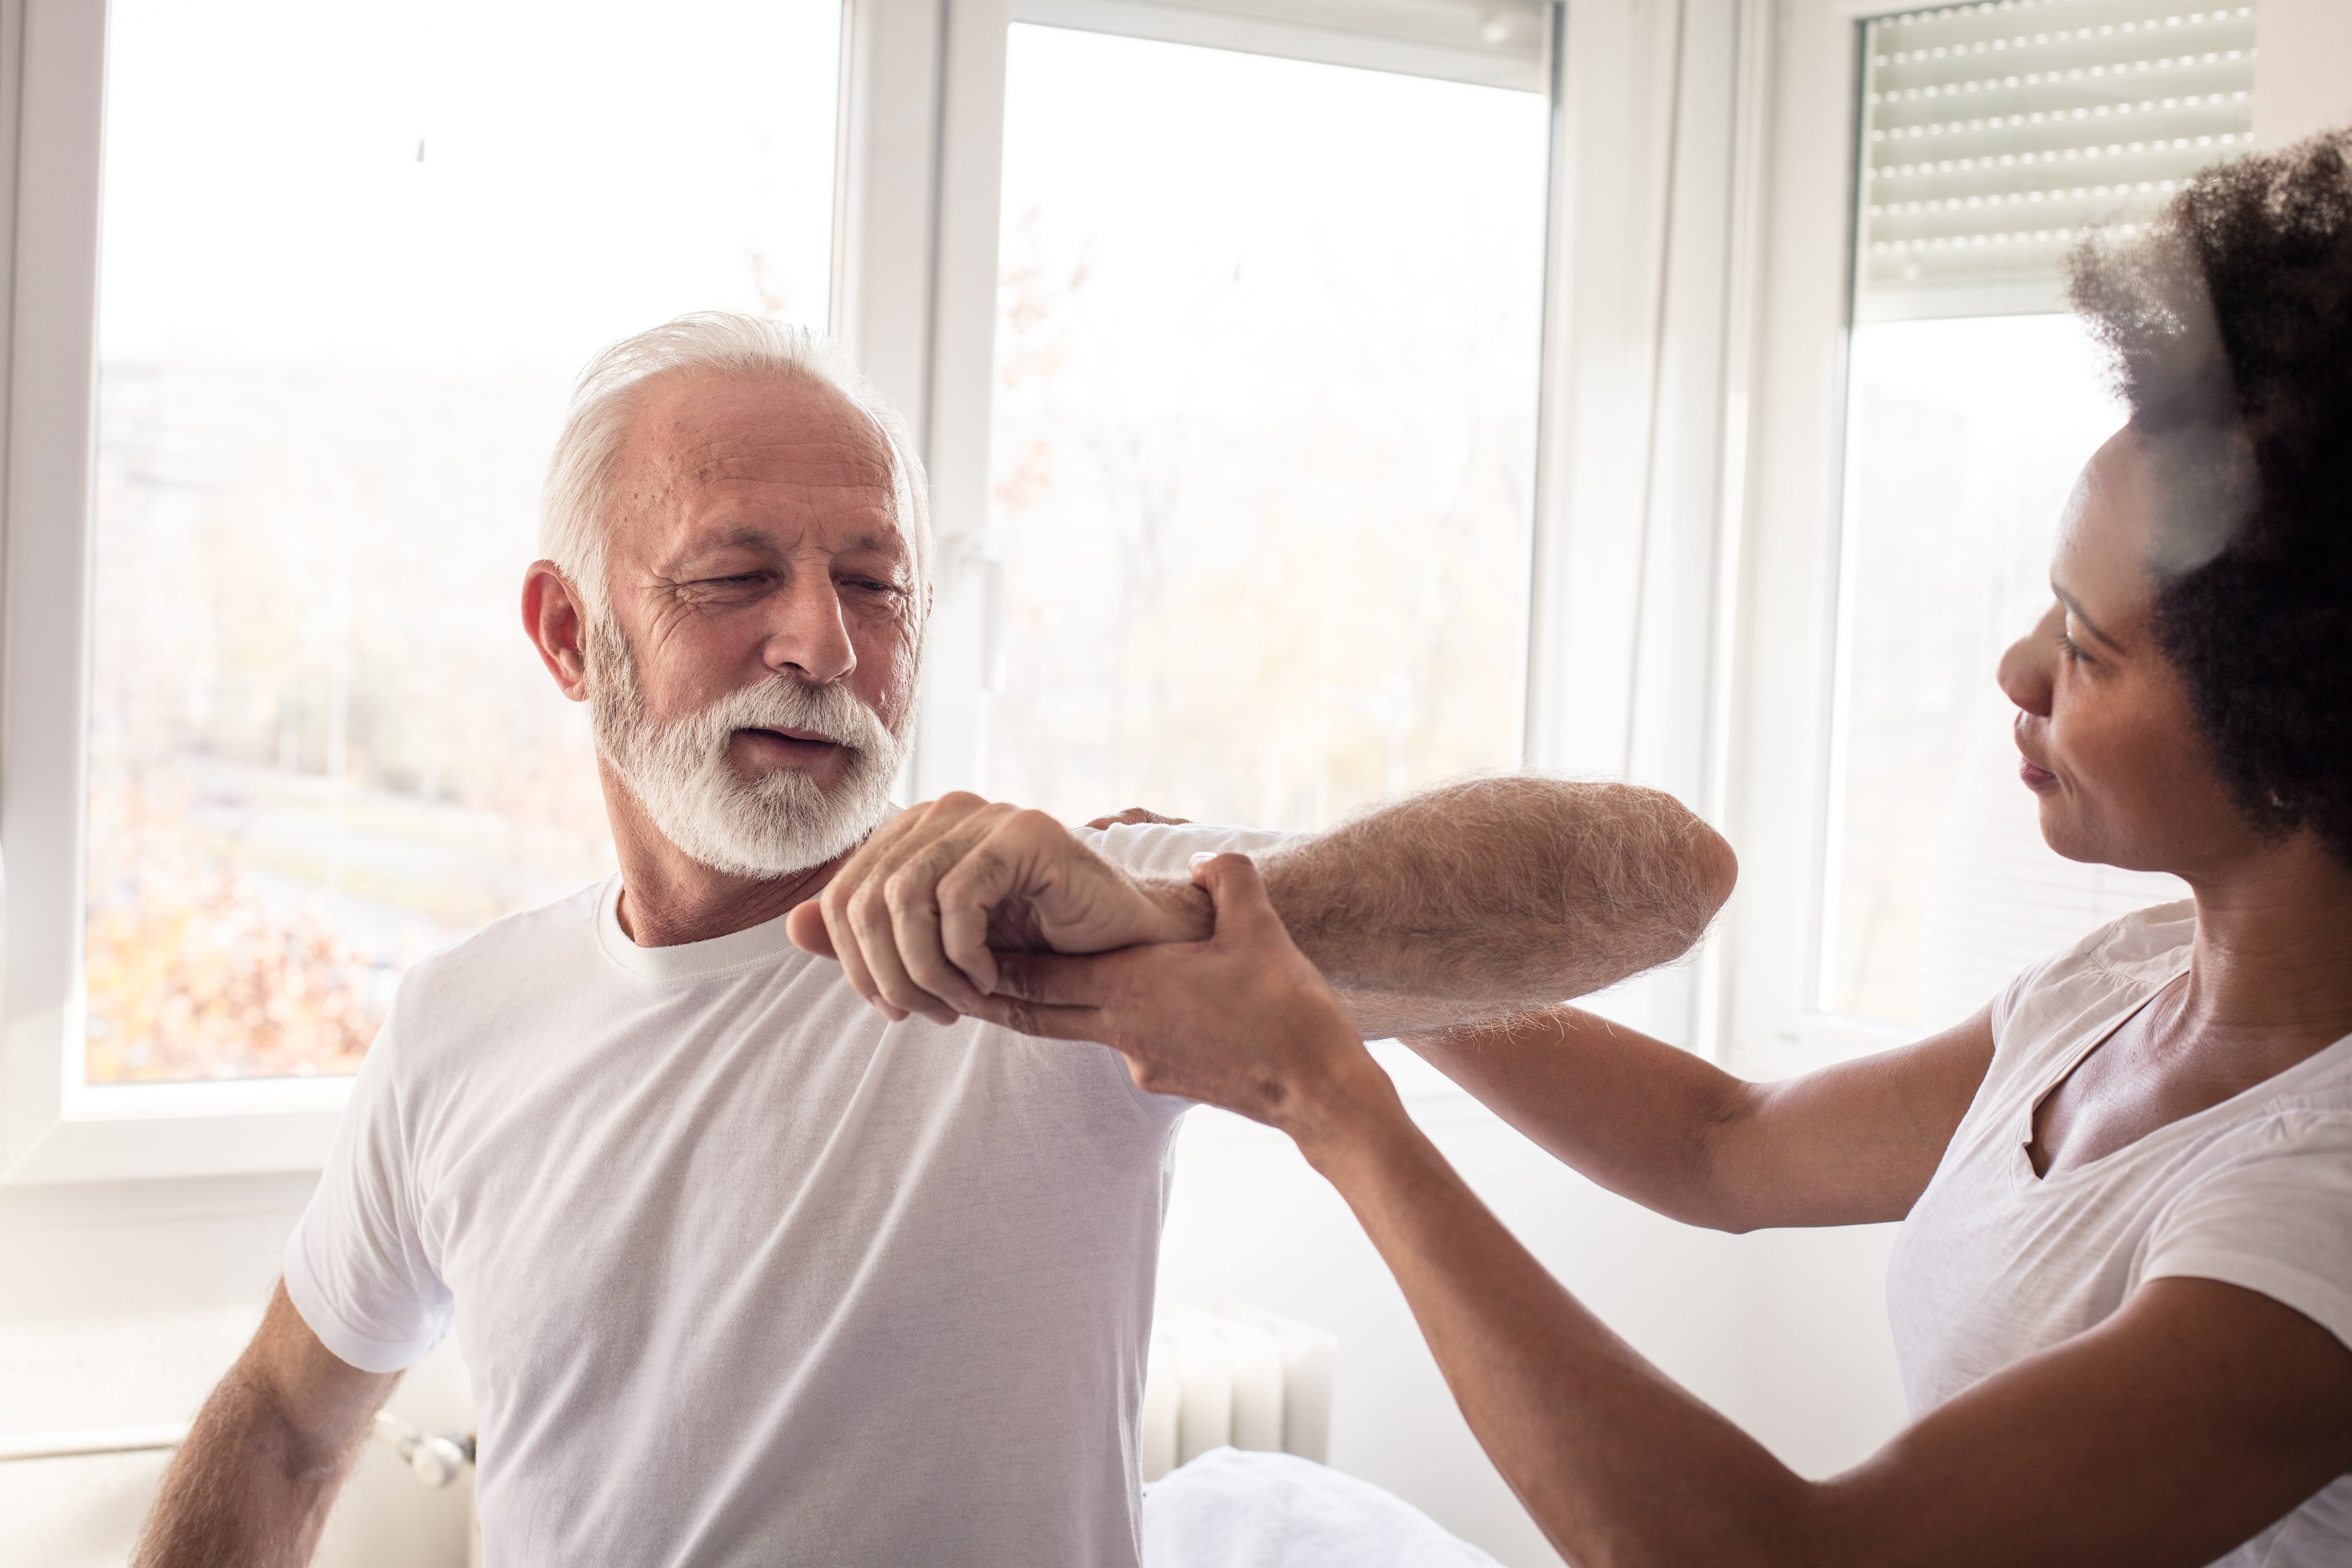 An older man undergoing physical therapy following a stroke